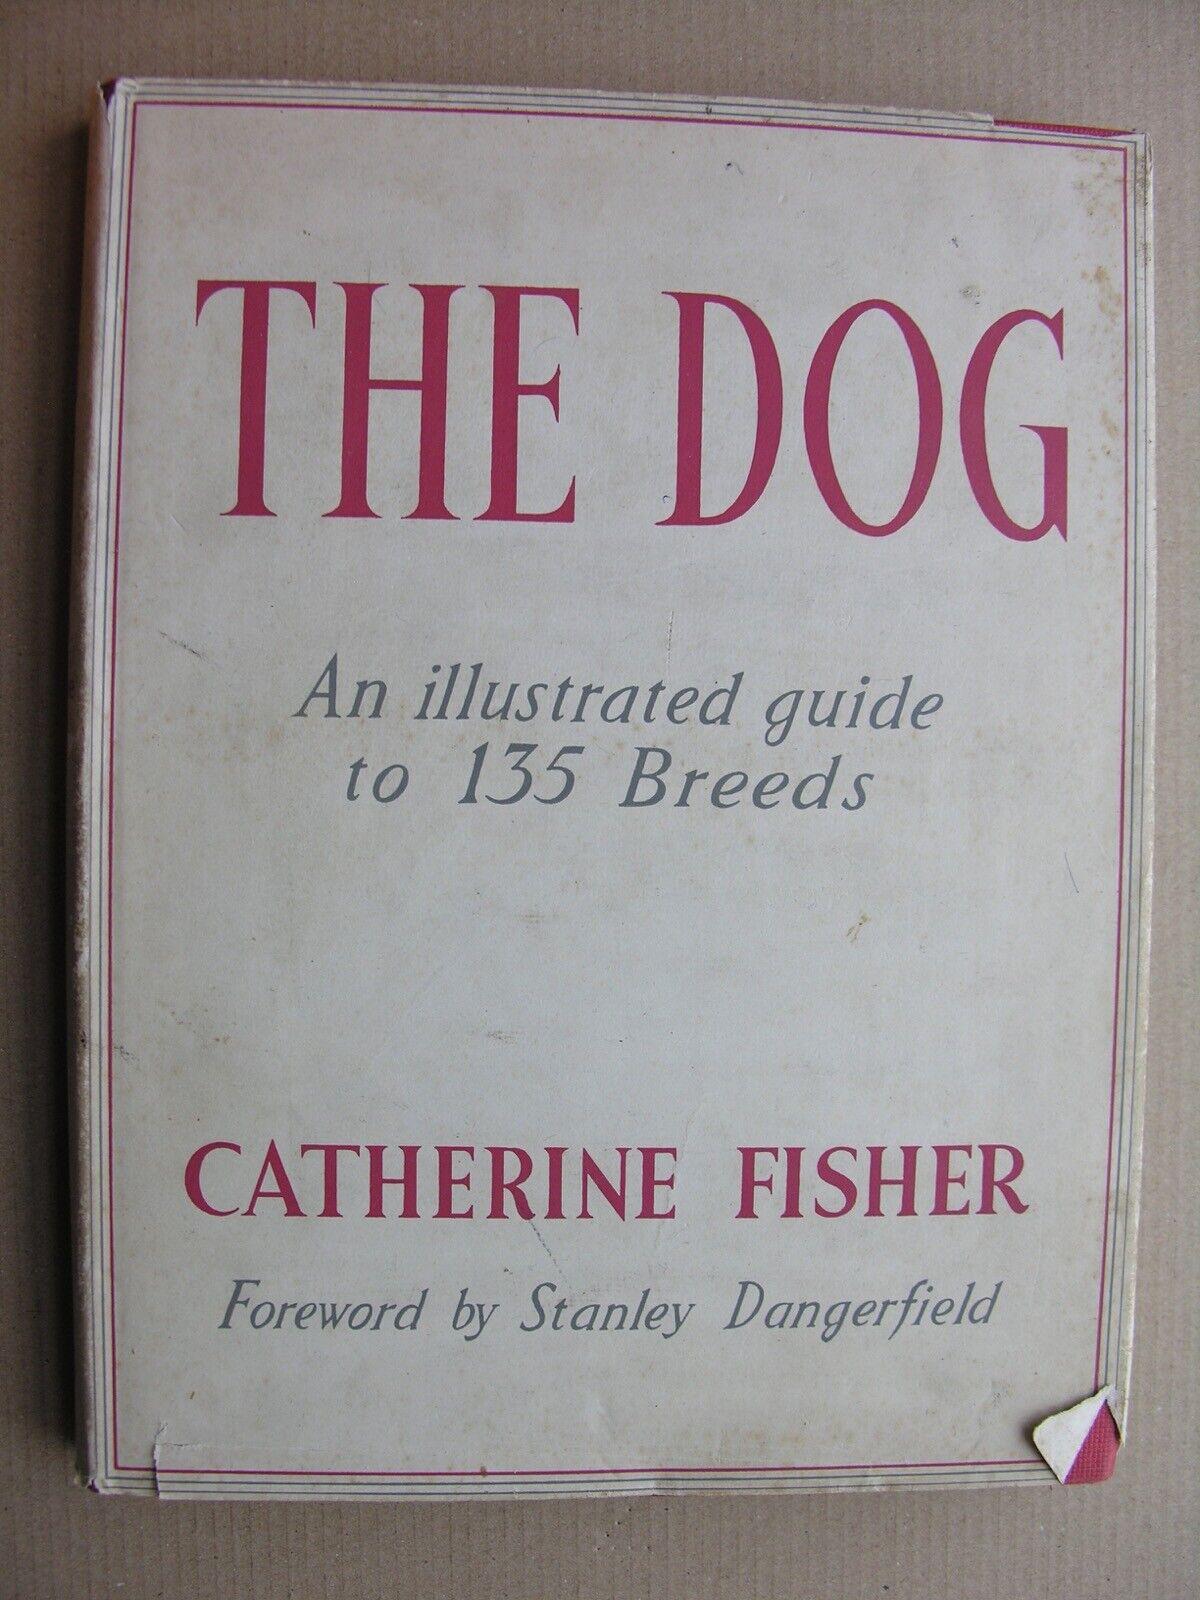 1960 THE DOG An Illustrated Guide to 135 Breeds Catherine Fisher 1st Ed Hardback